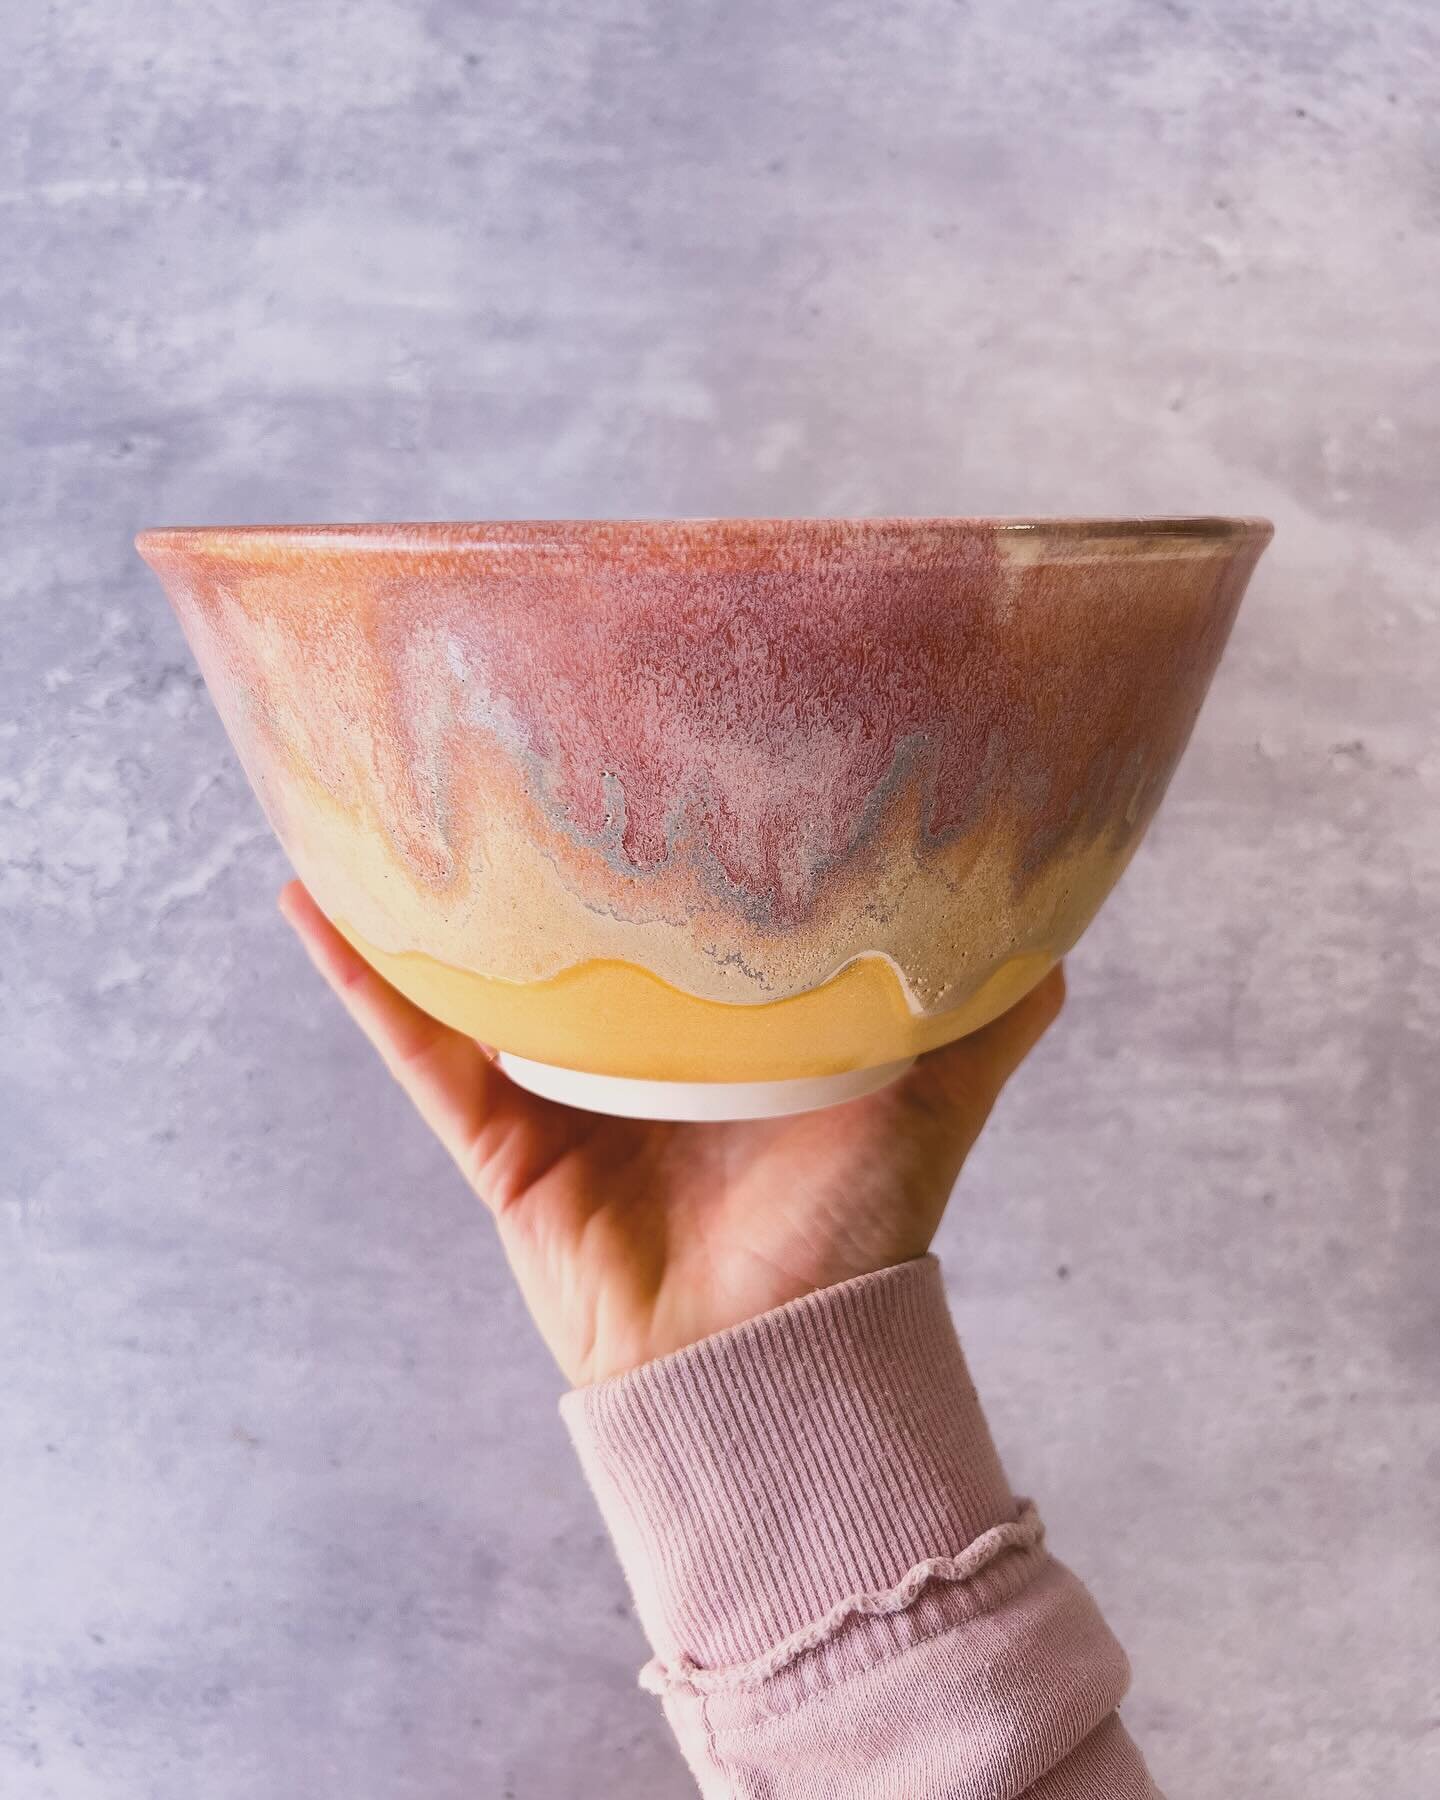 Another day, another pot. This decorative bowl turned out stunning with its yellows, pinks, blues, and greys. It&rsquo;s another, &ldquo;I think I&rsquo;ll have to keep this&rdquo; type piece. The colors are so vibrant! 

This one is made from porcel